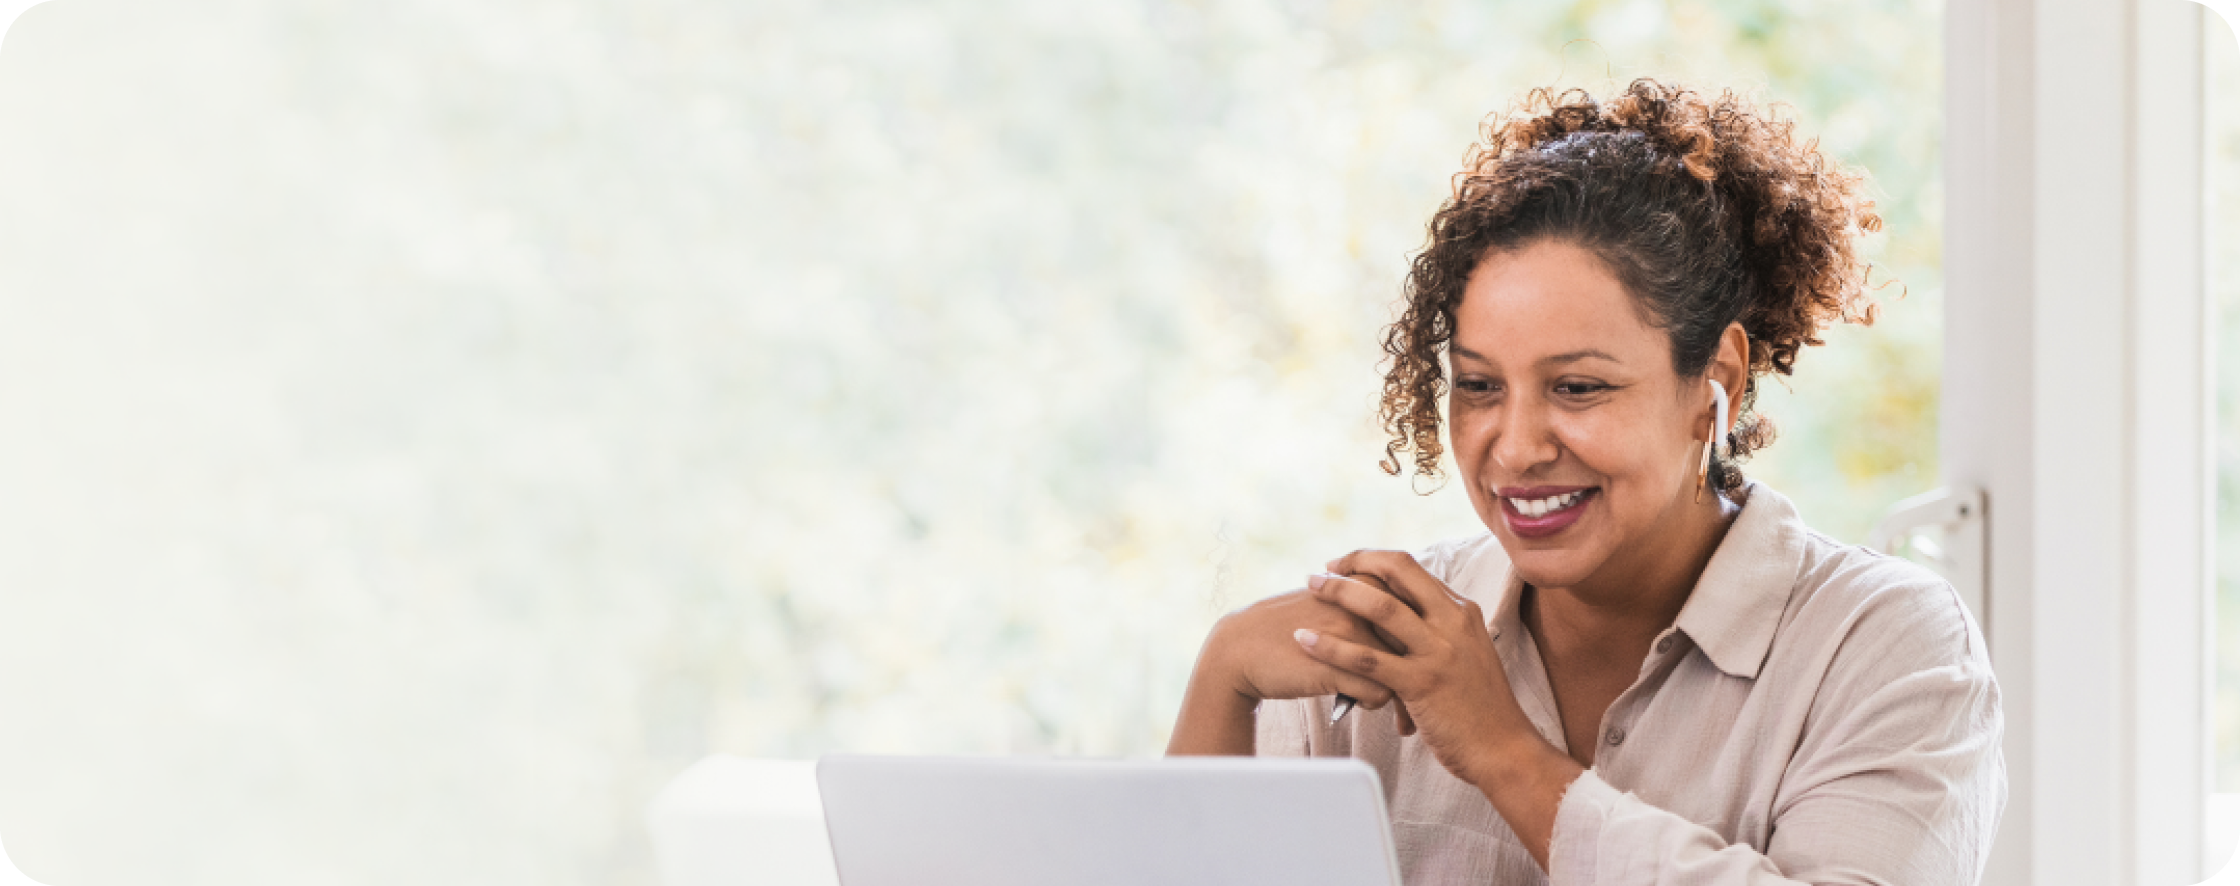 Woman wearing wireless earbuds smiling while looking at a laptop